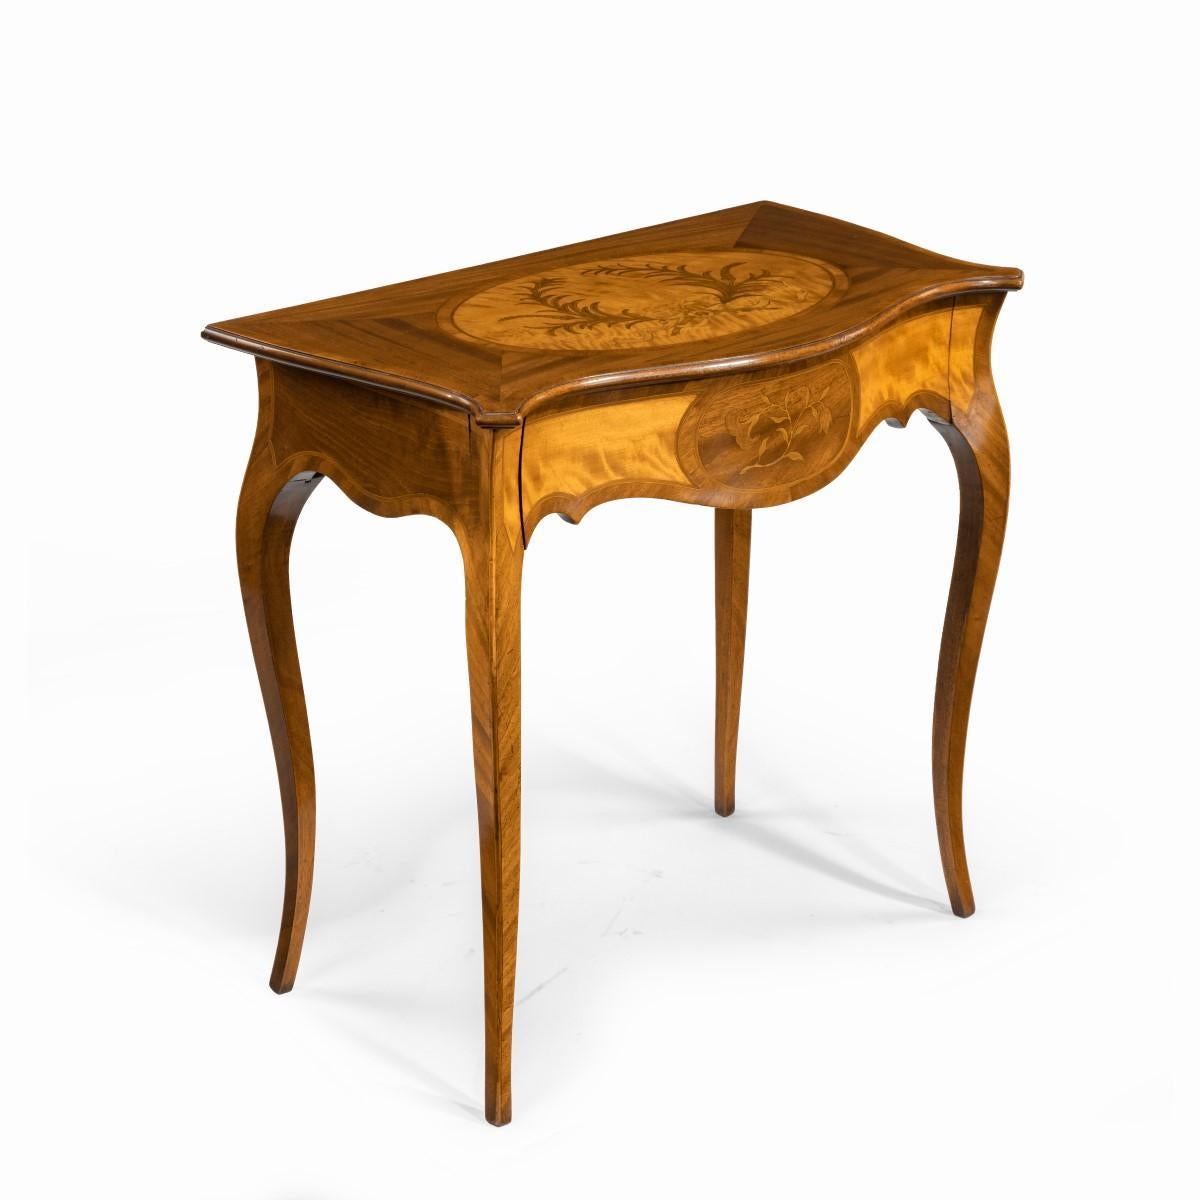 19th Century Victorian Inlaid Satinwood and Kingwood Table in the Style of Hepplewhite For Sale